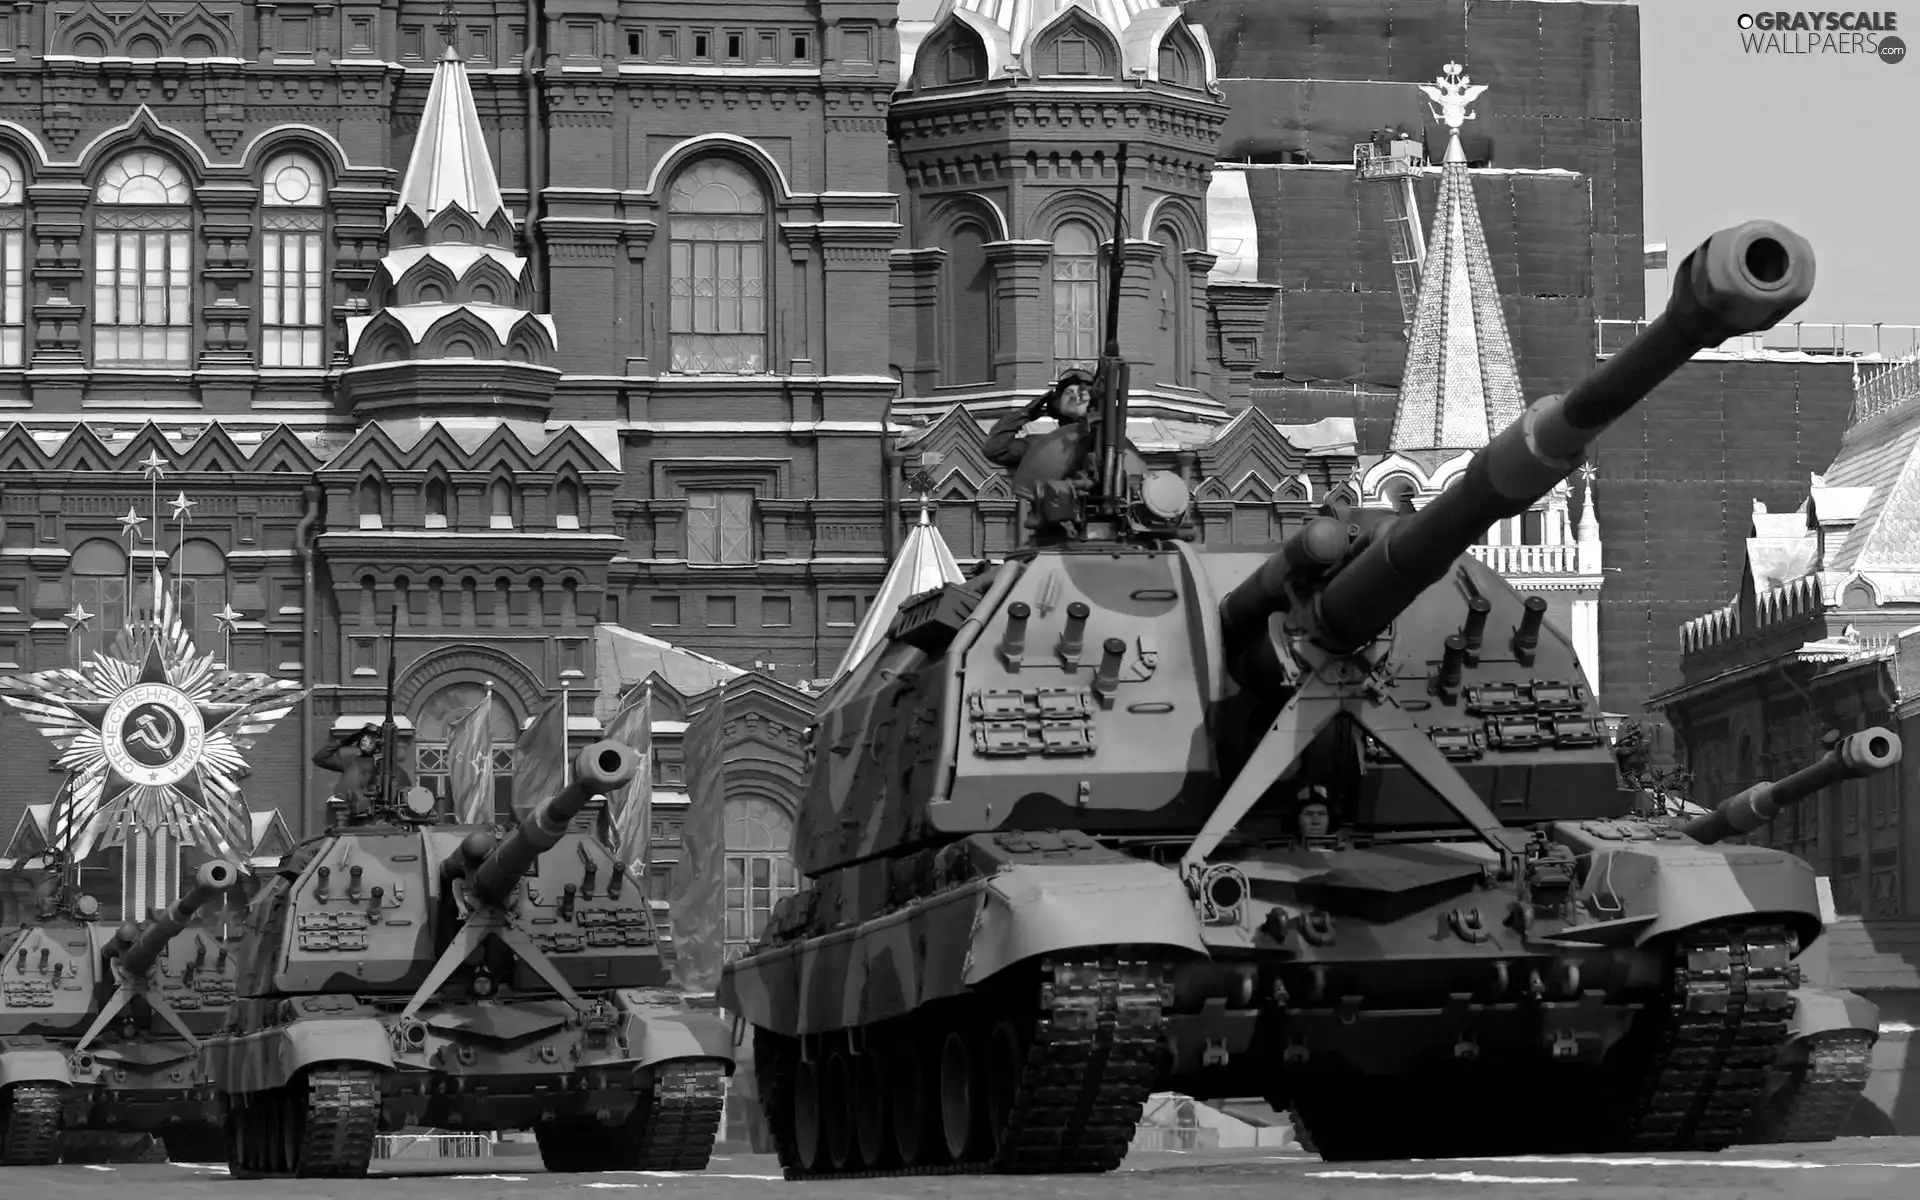 tanks, Red Square, Moscow, soldiers